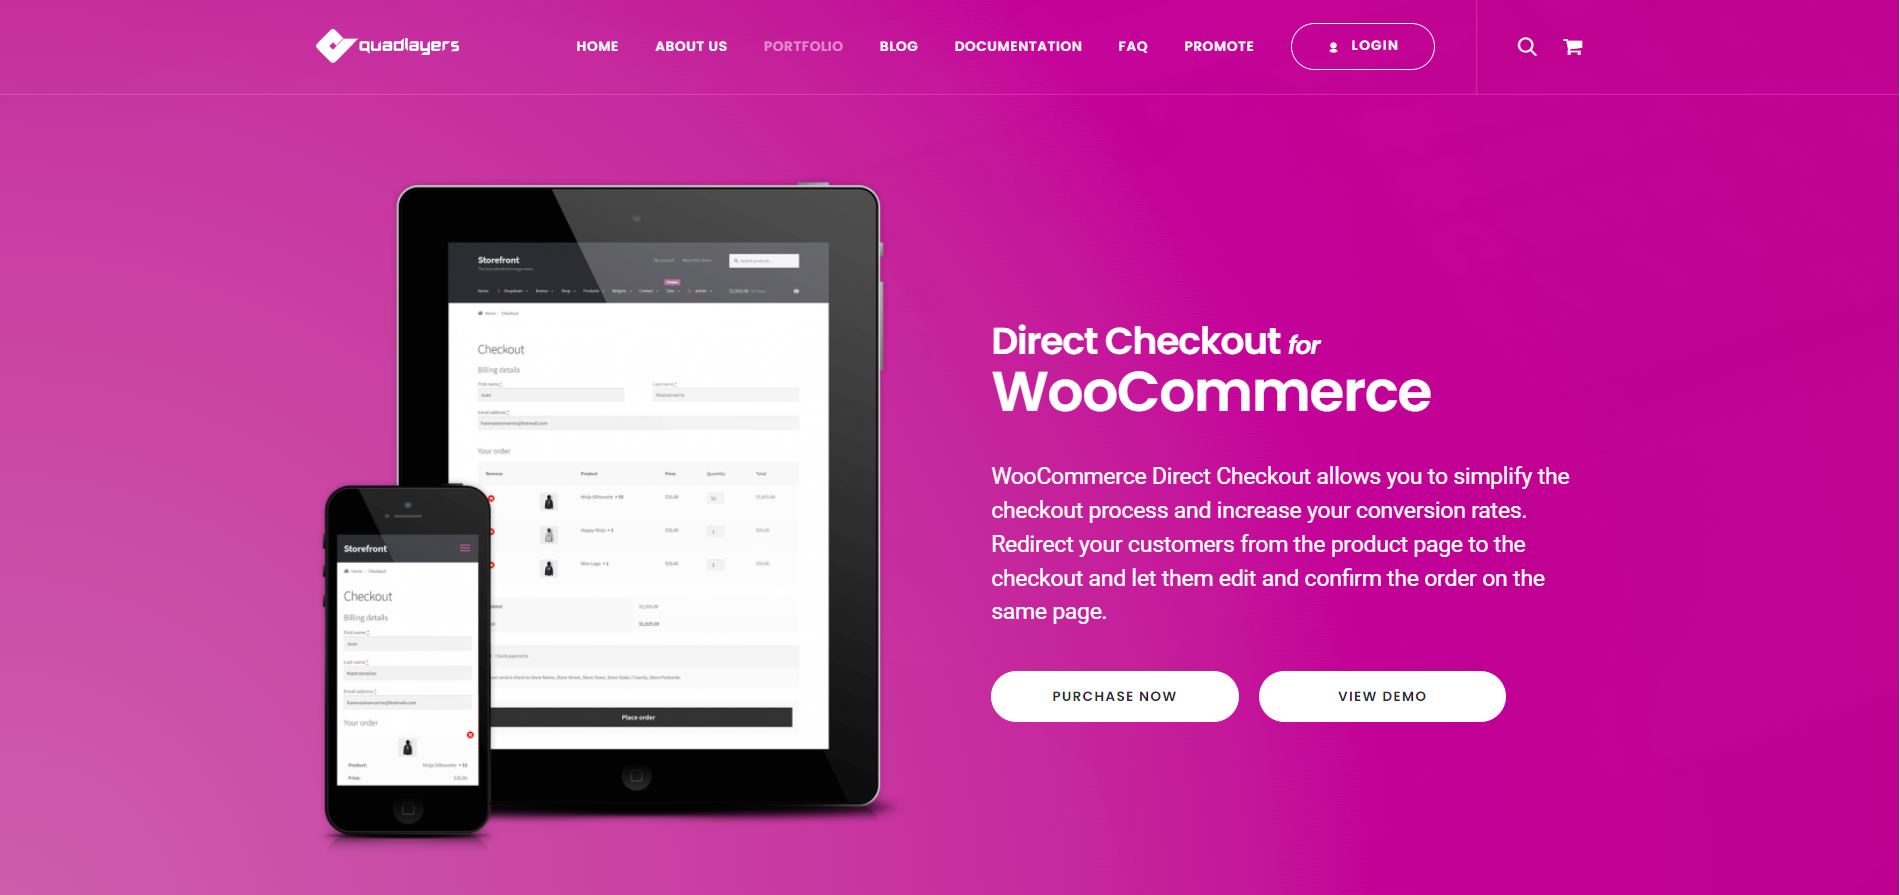 Direct Checkout for WooCommerce homepage